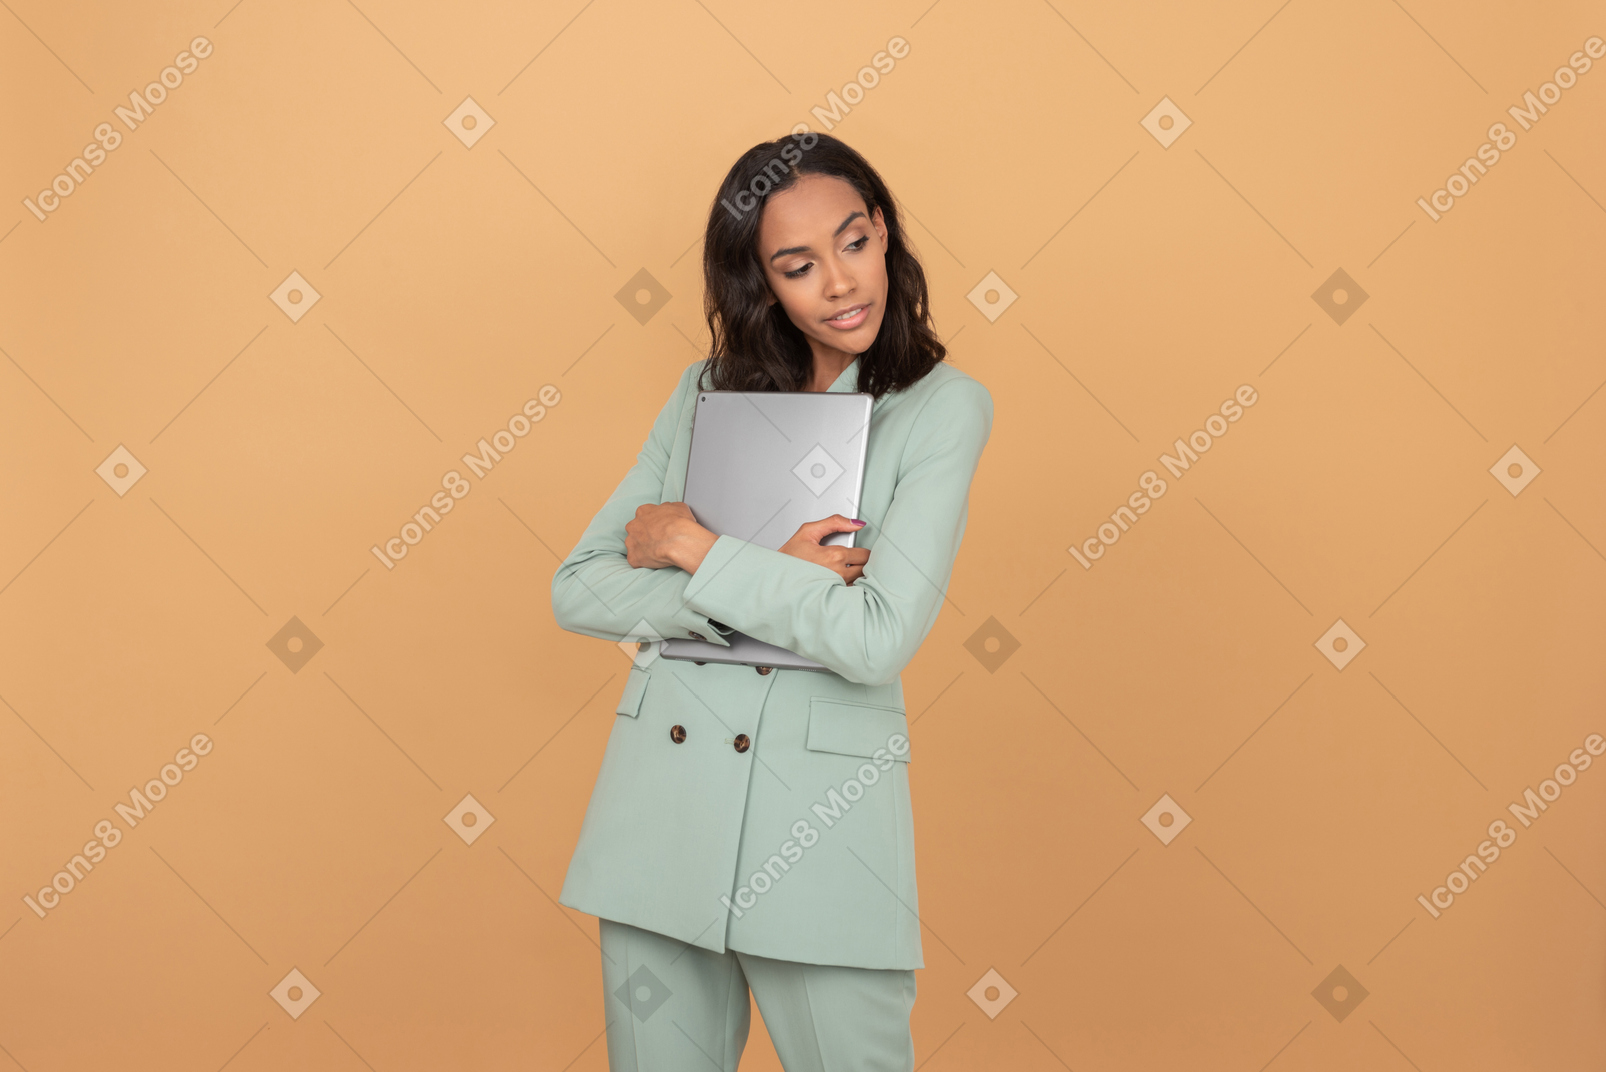 Attractive woman holding tablet close to her and looking aside at something with interest